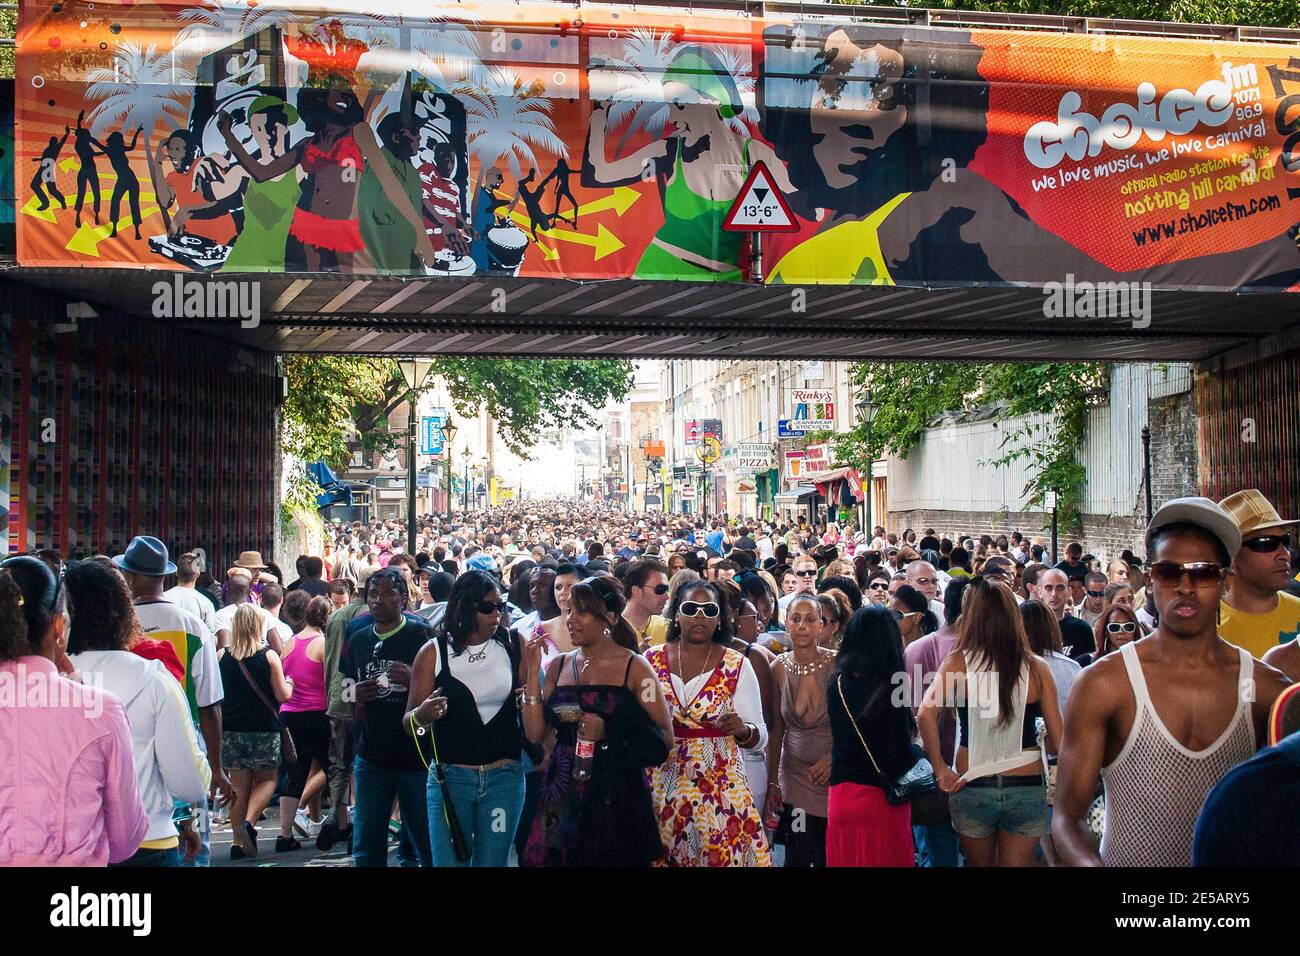 Crowds of people at Notting Hill Carnival, London Stock Photo